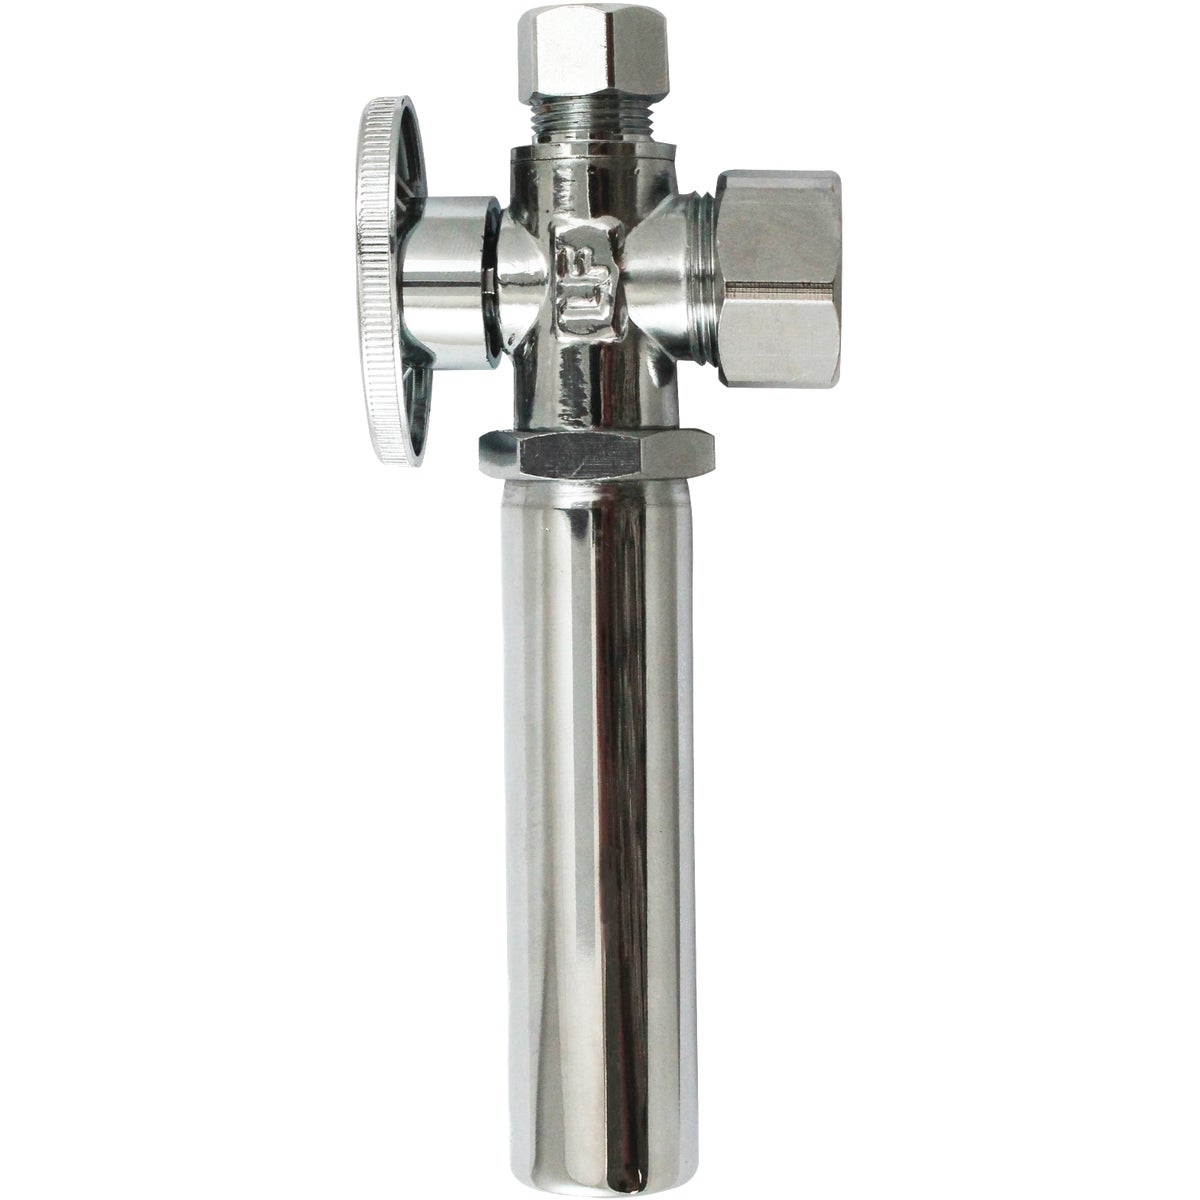 Item 469426, Quarter turn angle valve with water hammer arrestor to prevent noise and 